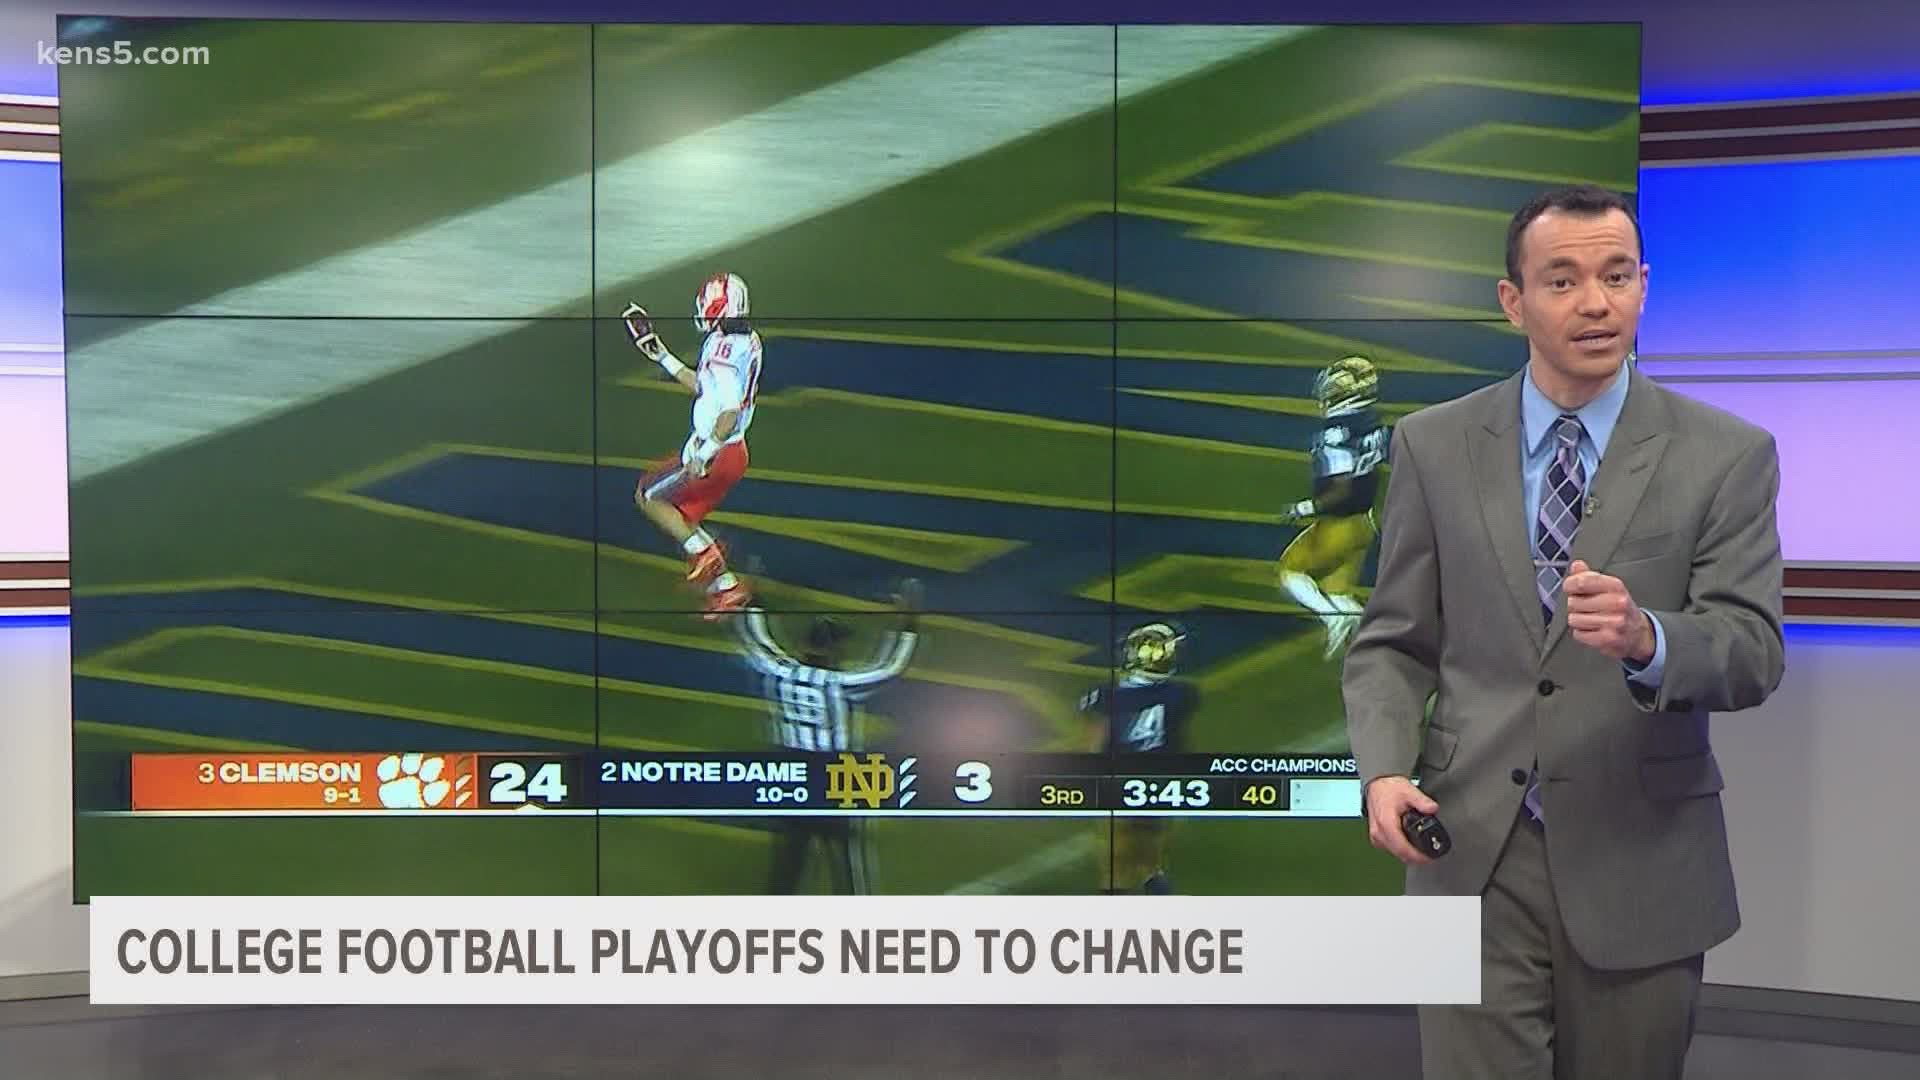 KENS 5's Evan Closky makes the case that change is needed with the way teams are selected to play in the College Football Playoff.